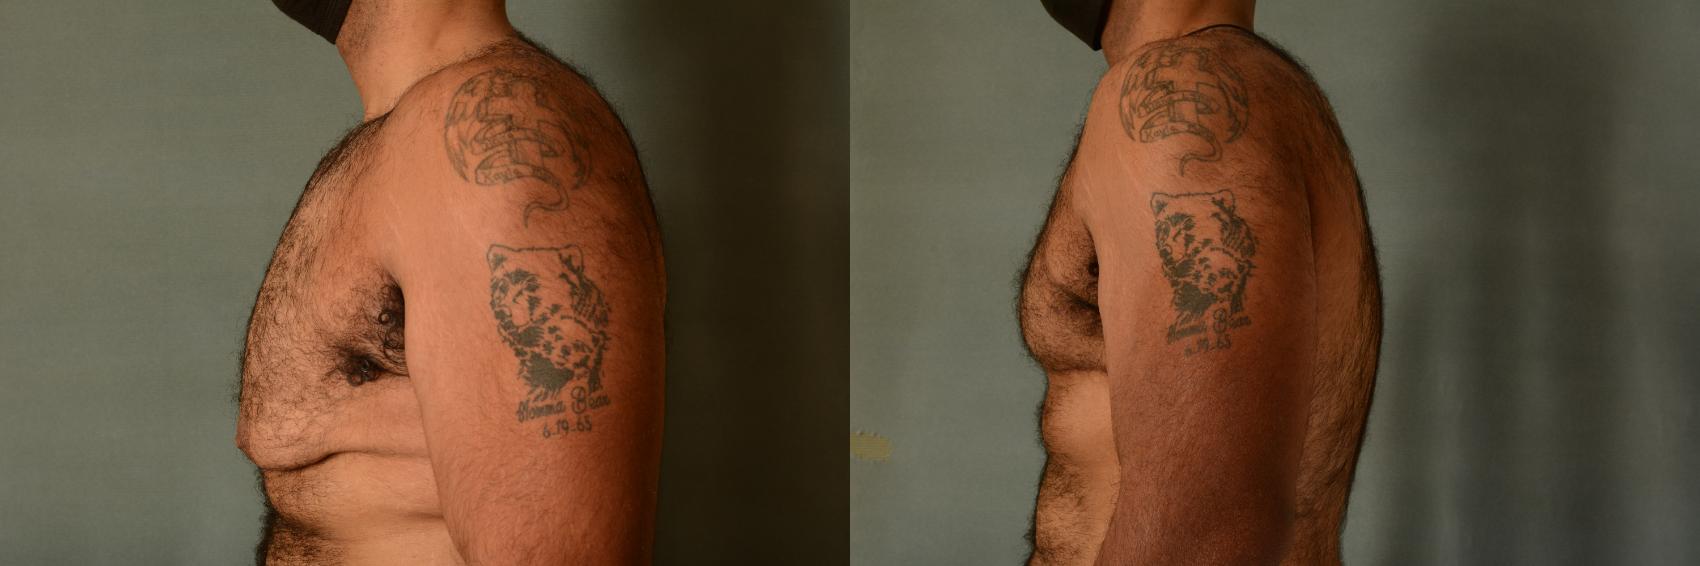 Michigan Center for Cosmetic Surgery Upgrades NdYAG Laser Tattoo Removal  to Astanza Trinity  Astanza Laser LLC